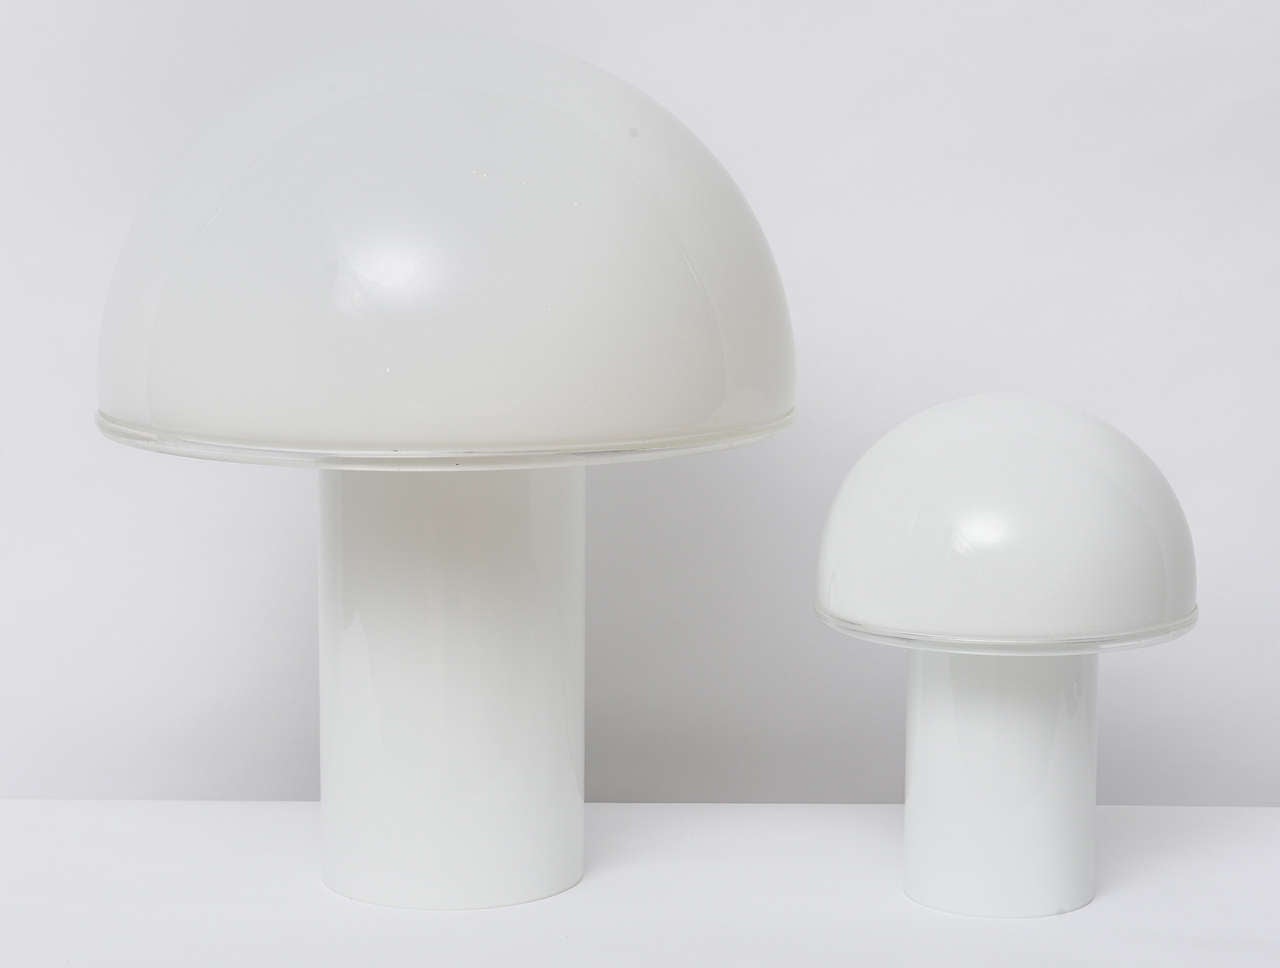 Beautiful pair of glass mushroom laps by Vistosi for Artemide.  Italy, 1970s

Items sold as a set, but can be sold separately.  Please just inquire.